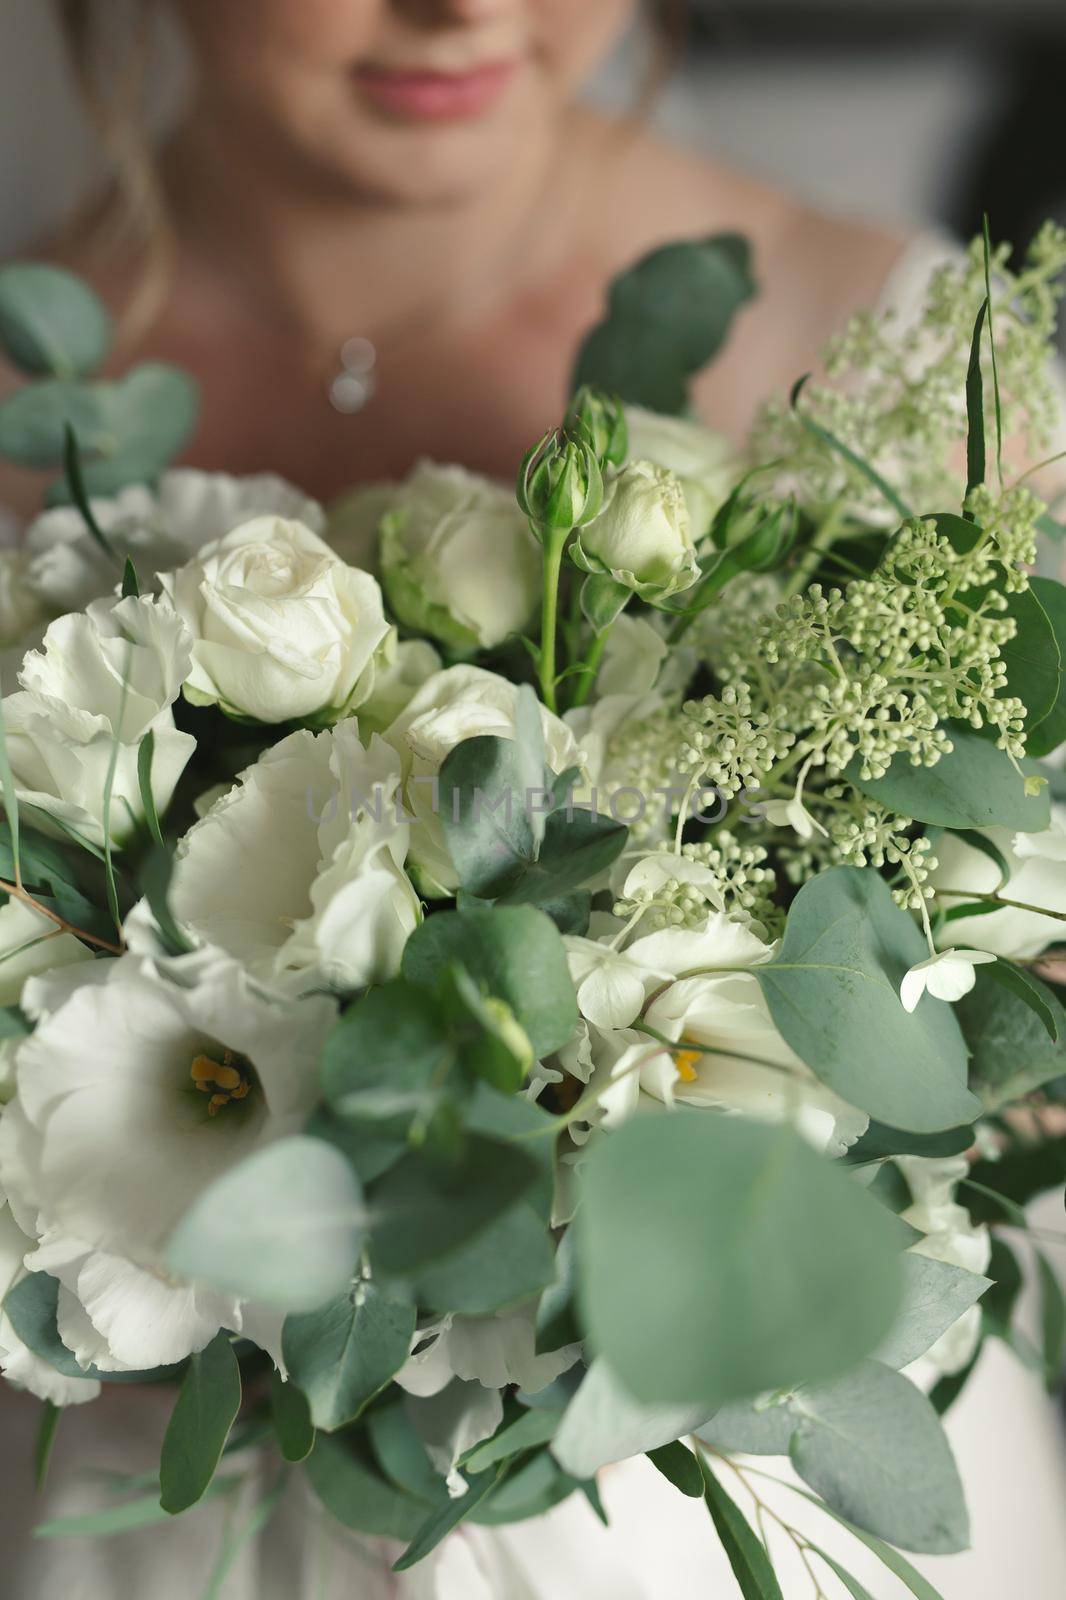 Close-up of a bouquet of flowers in the hands of the bride.